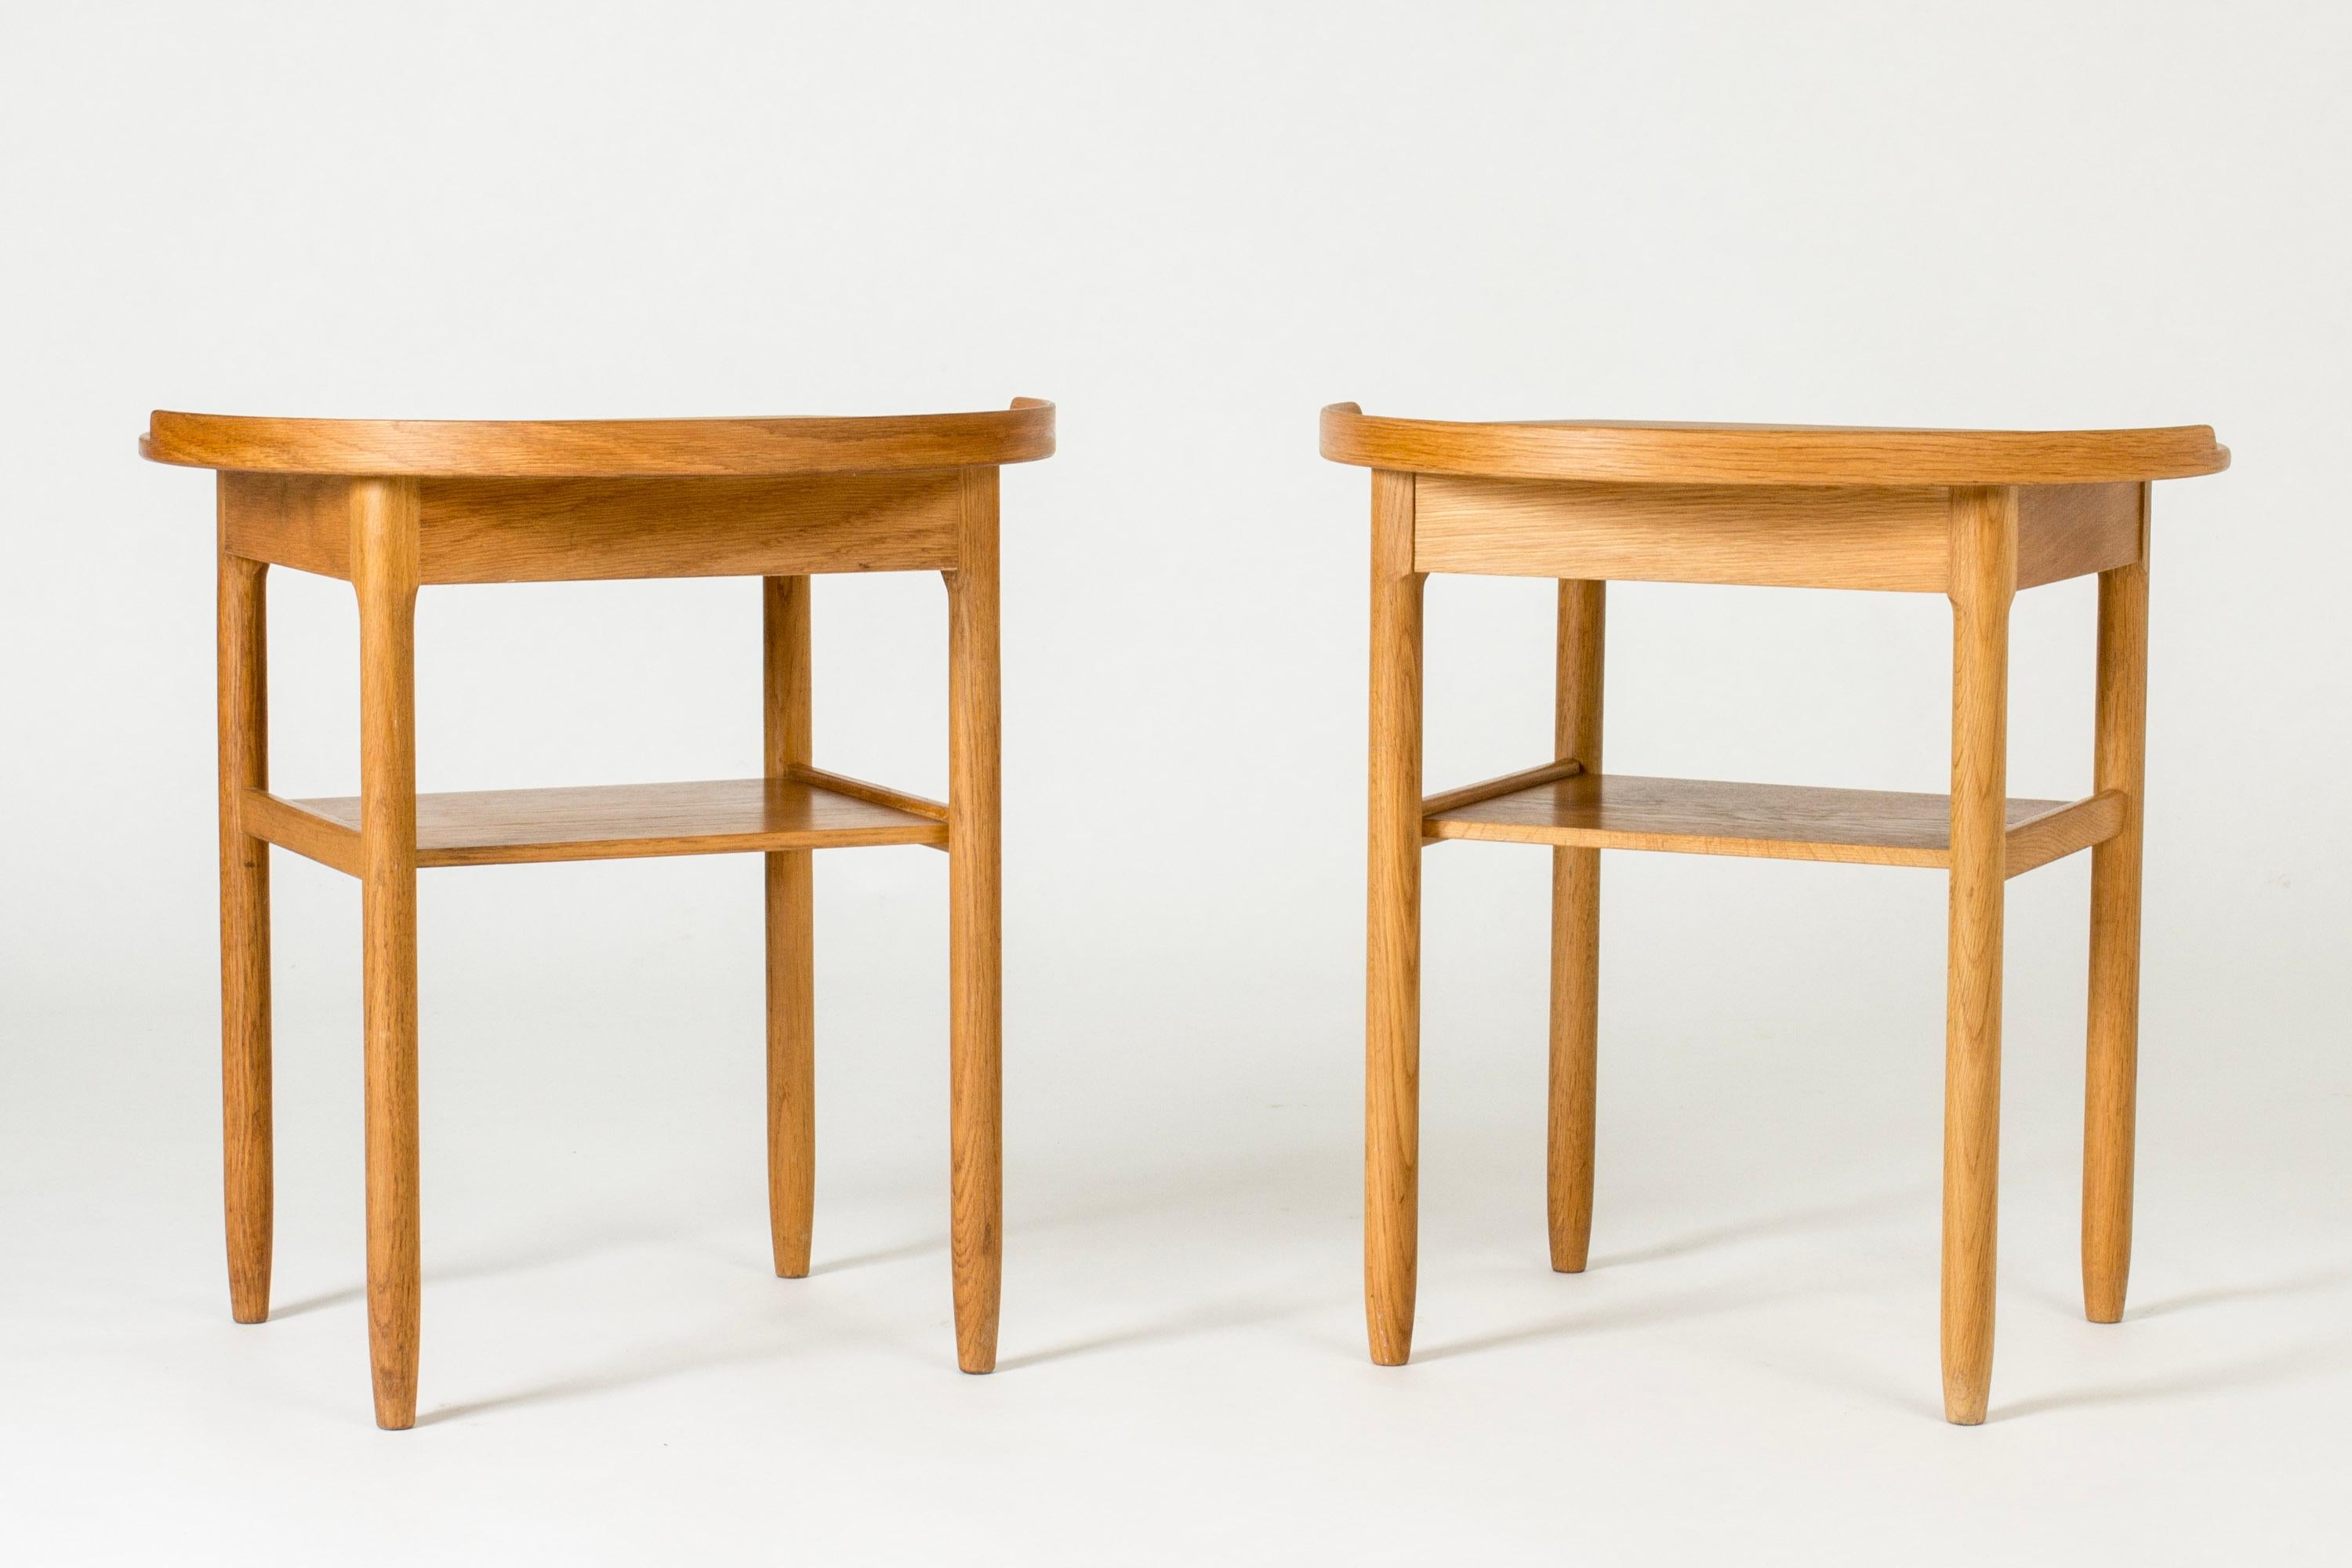 Pair of neat bedside tables by Sven Engström and Gunnar Myrstrand, made from oak. Rounded design with sculpted drawer handles and a rim around half the table tops.